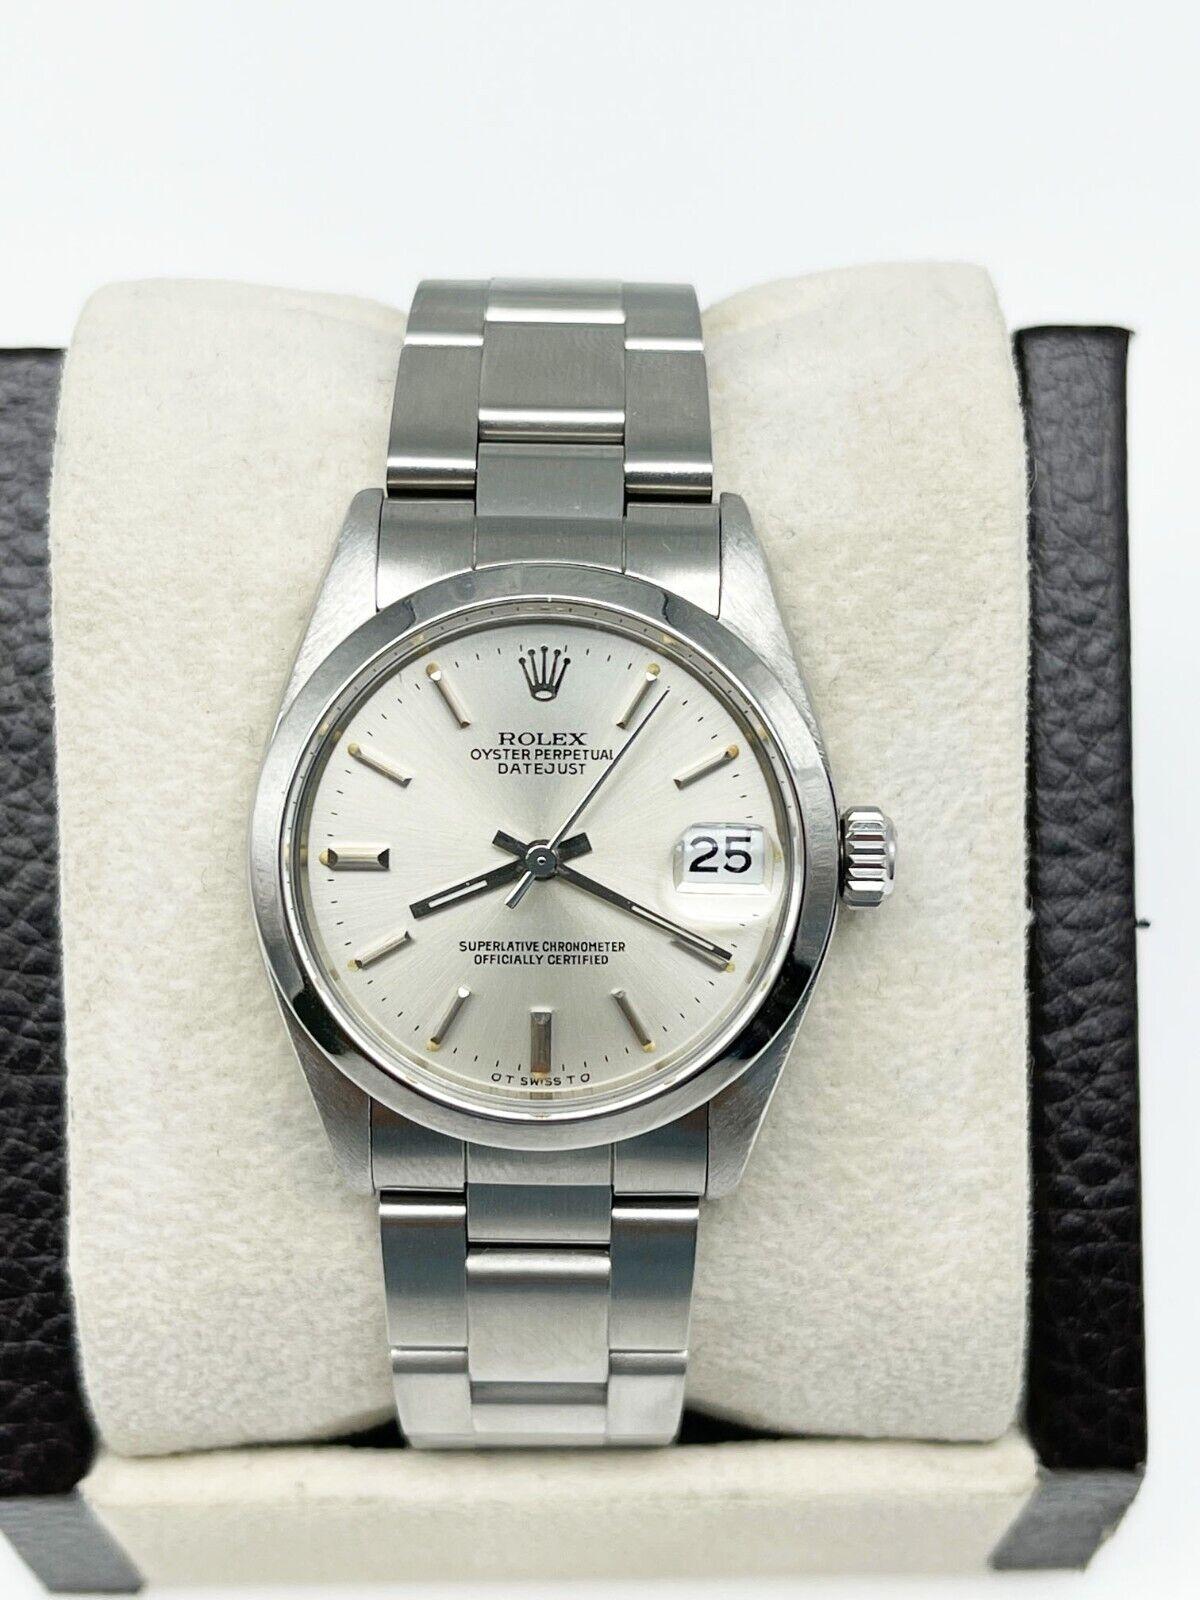 Style Number: 6824

 

Serial: 5121***

 

Model: Rolex Midsize Datejust

 

Case Material: Stainless Steel

 

Band: Stainless Steel

 

Bezel: Stainless Steel

 

Dial: Silver

 

Face: Acrylic

 

Case Size: 31mm

 

Includes: 

- Certified